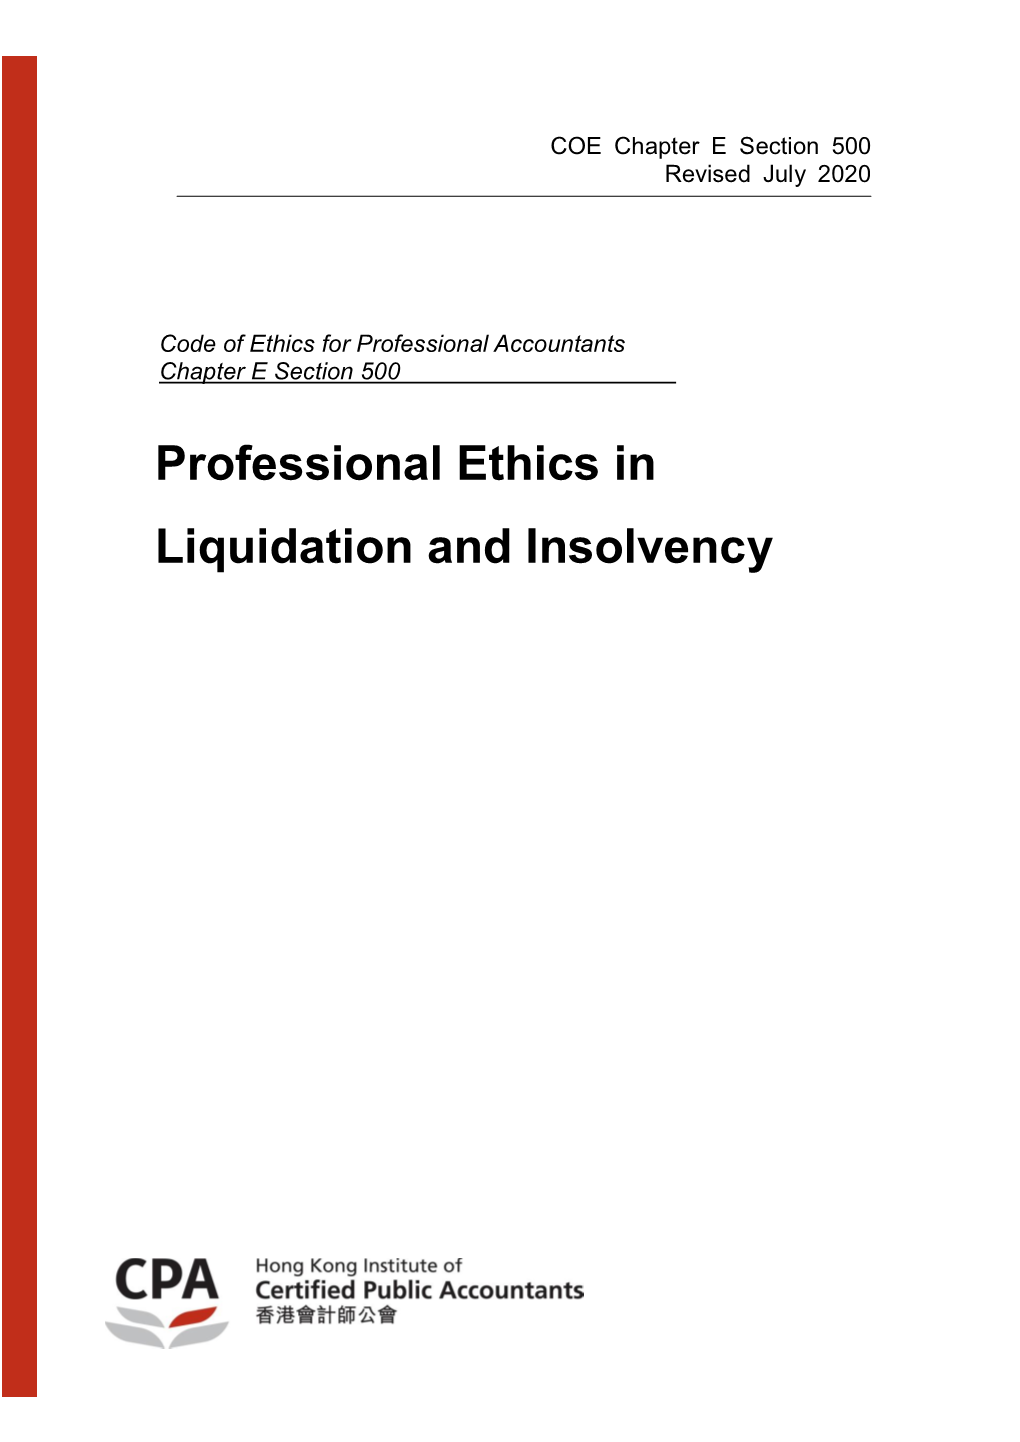 Professional Ethics in Liquidation and Insolvency